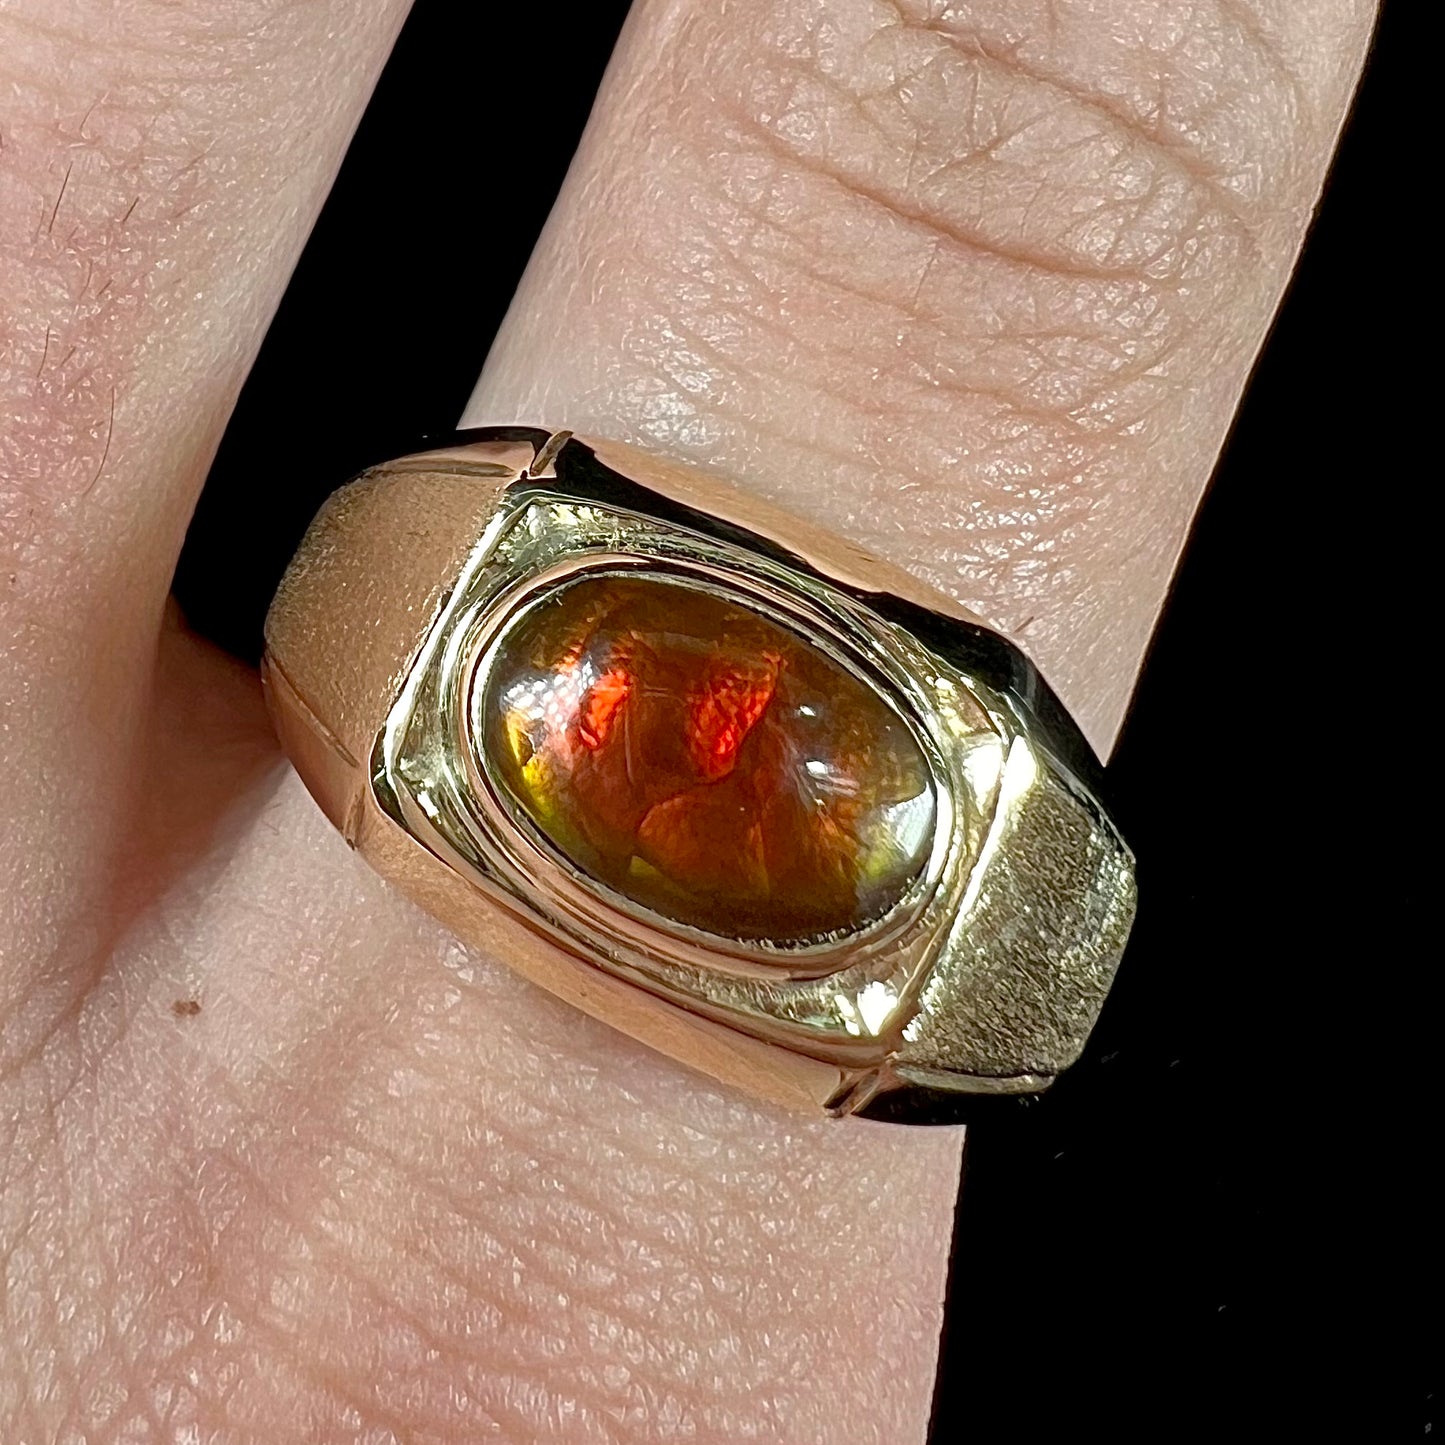 A yellow gold men's fire agate solitaire ring.  The fire agate is red with green undertones.